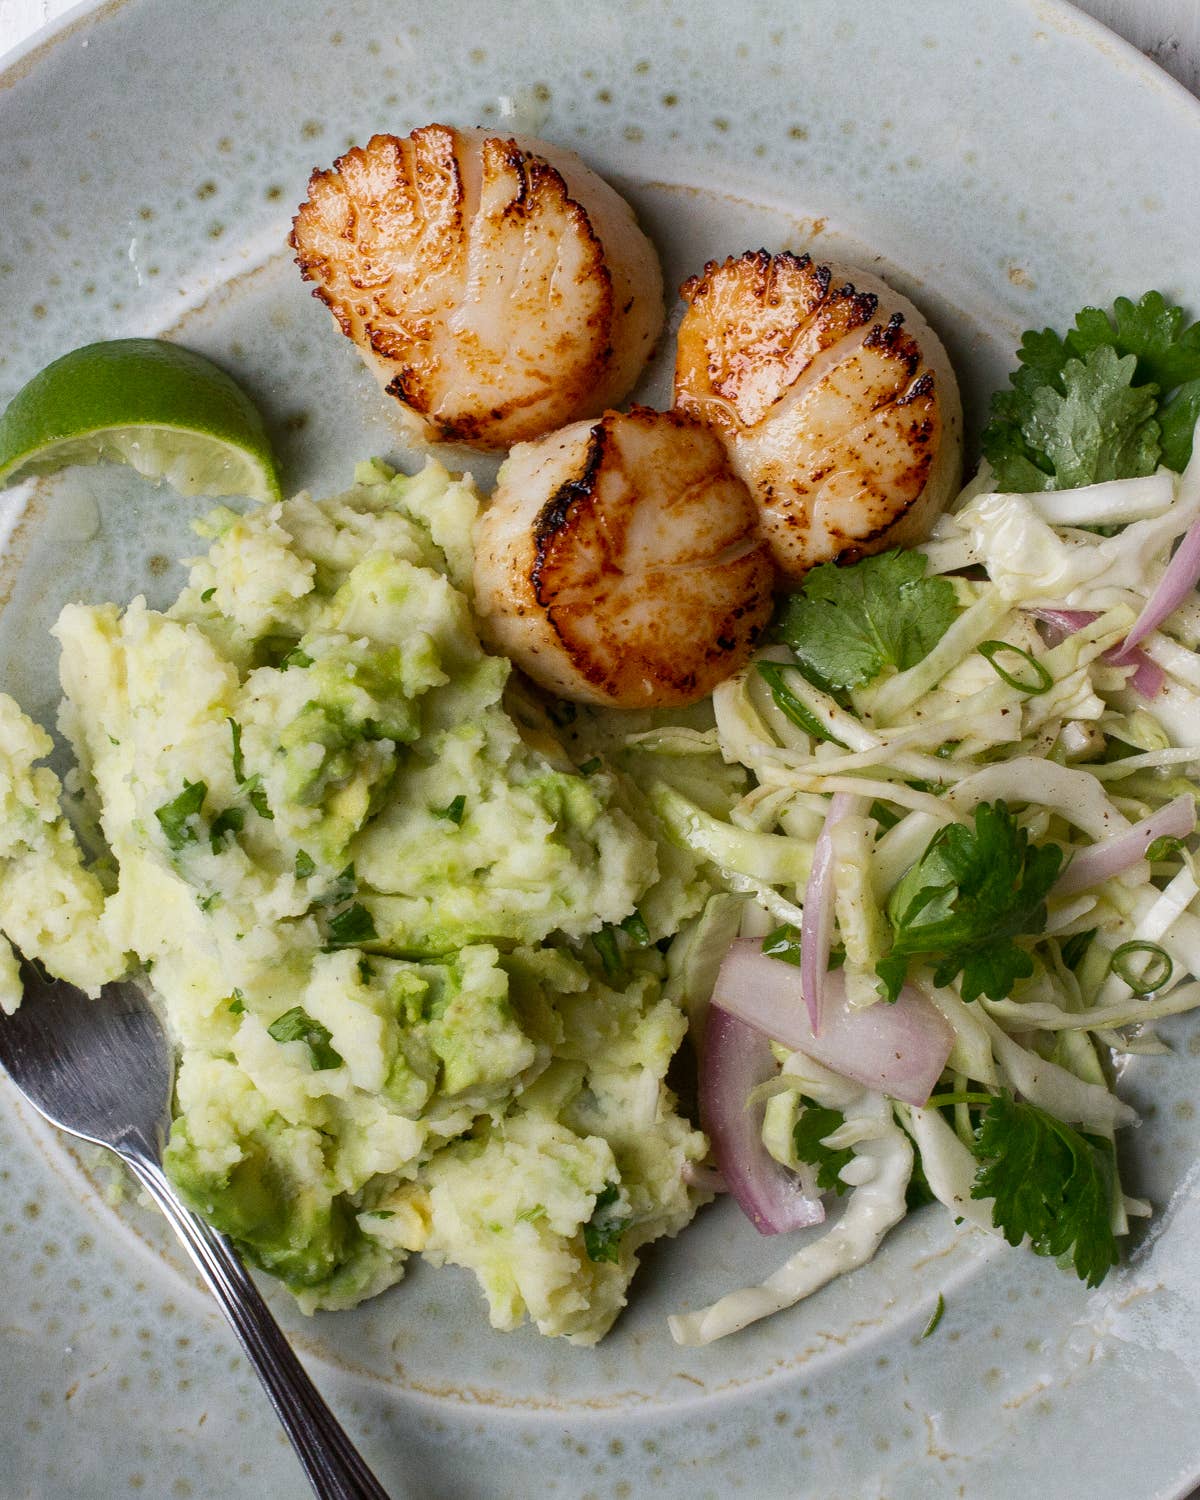 Scallops with Avocado Mashed Potatoes